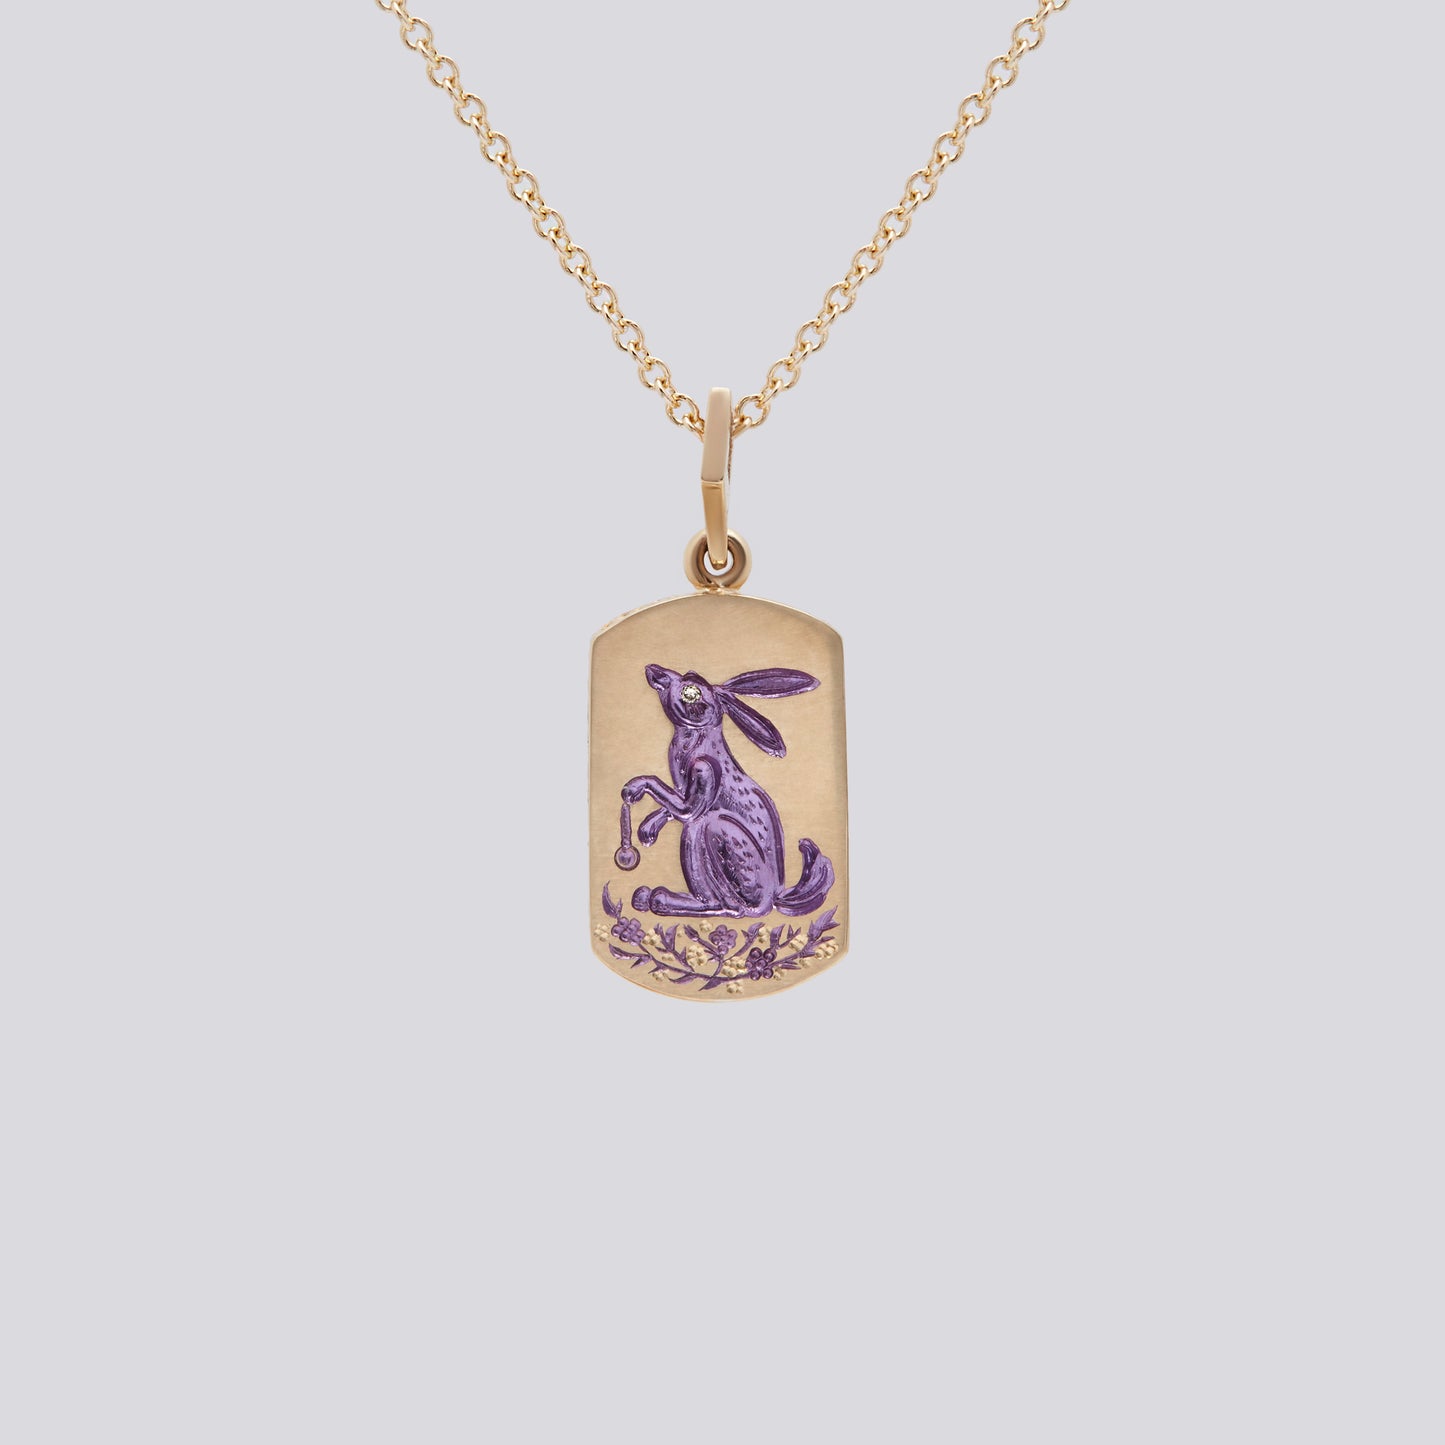 Castro Smith Jewelry Gold Rabbit Pendant Necklace with Purple Engravings.